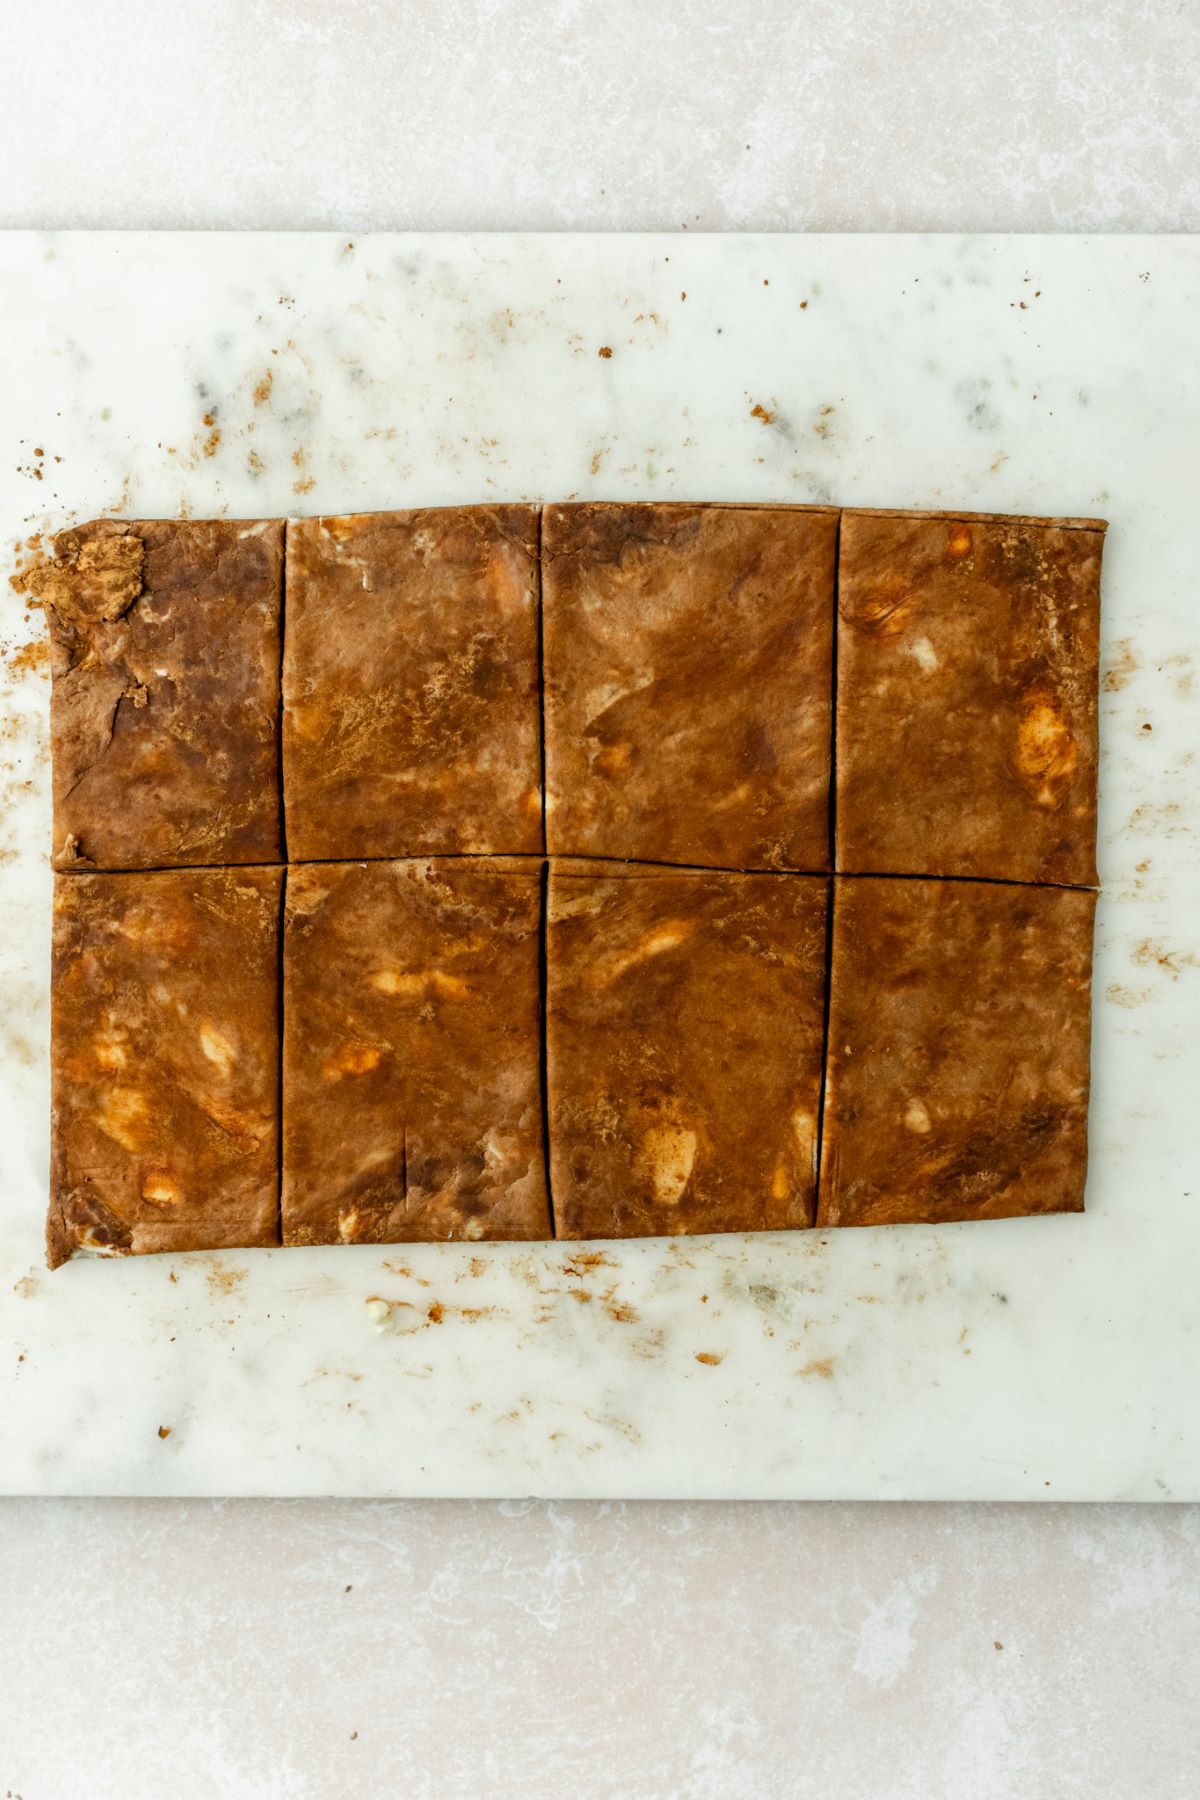 Chocolate dough cut into 8 rectangles on a marble board.